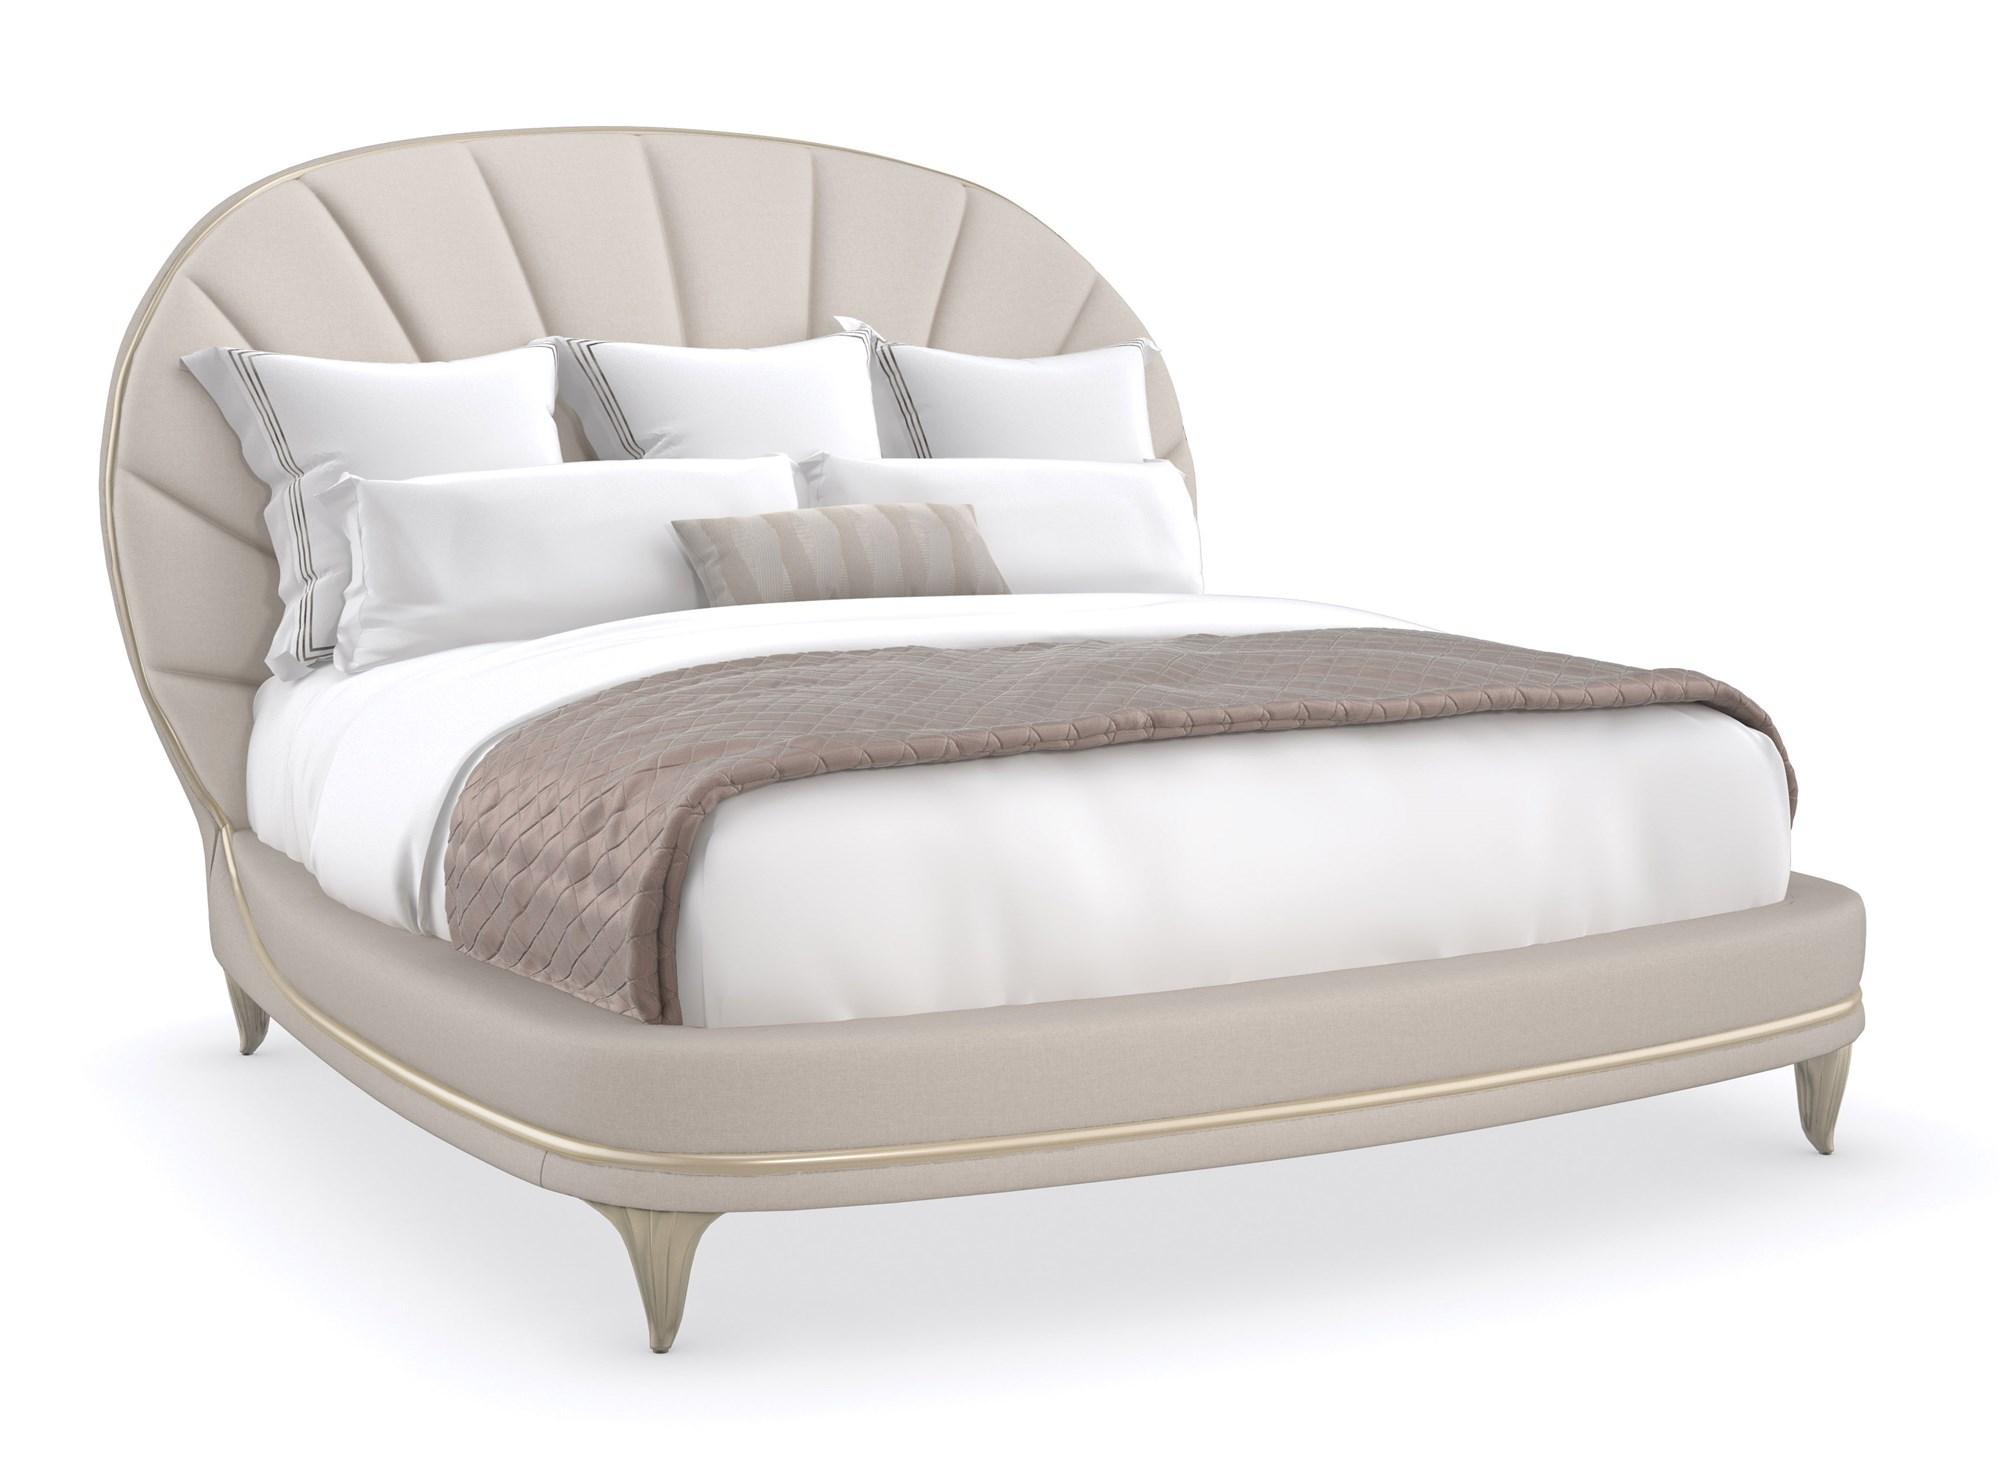 Contemporary Platform Bed LILLIAN C093-020-121-EK in Taupe, Gold Fabric